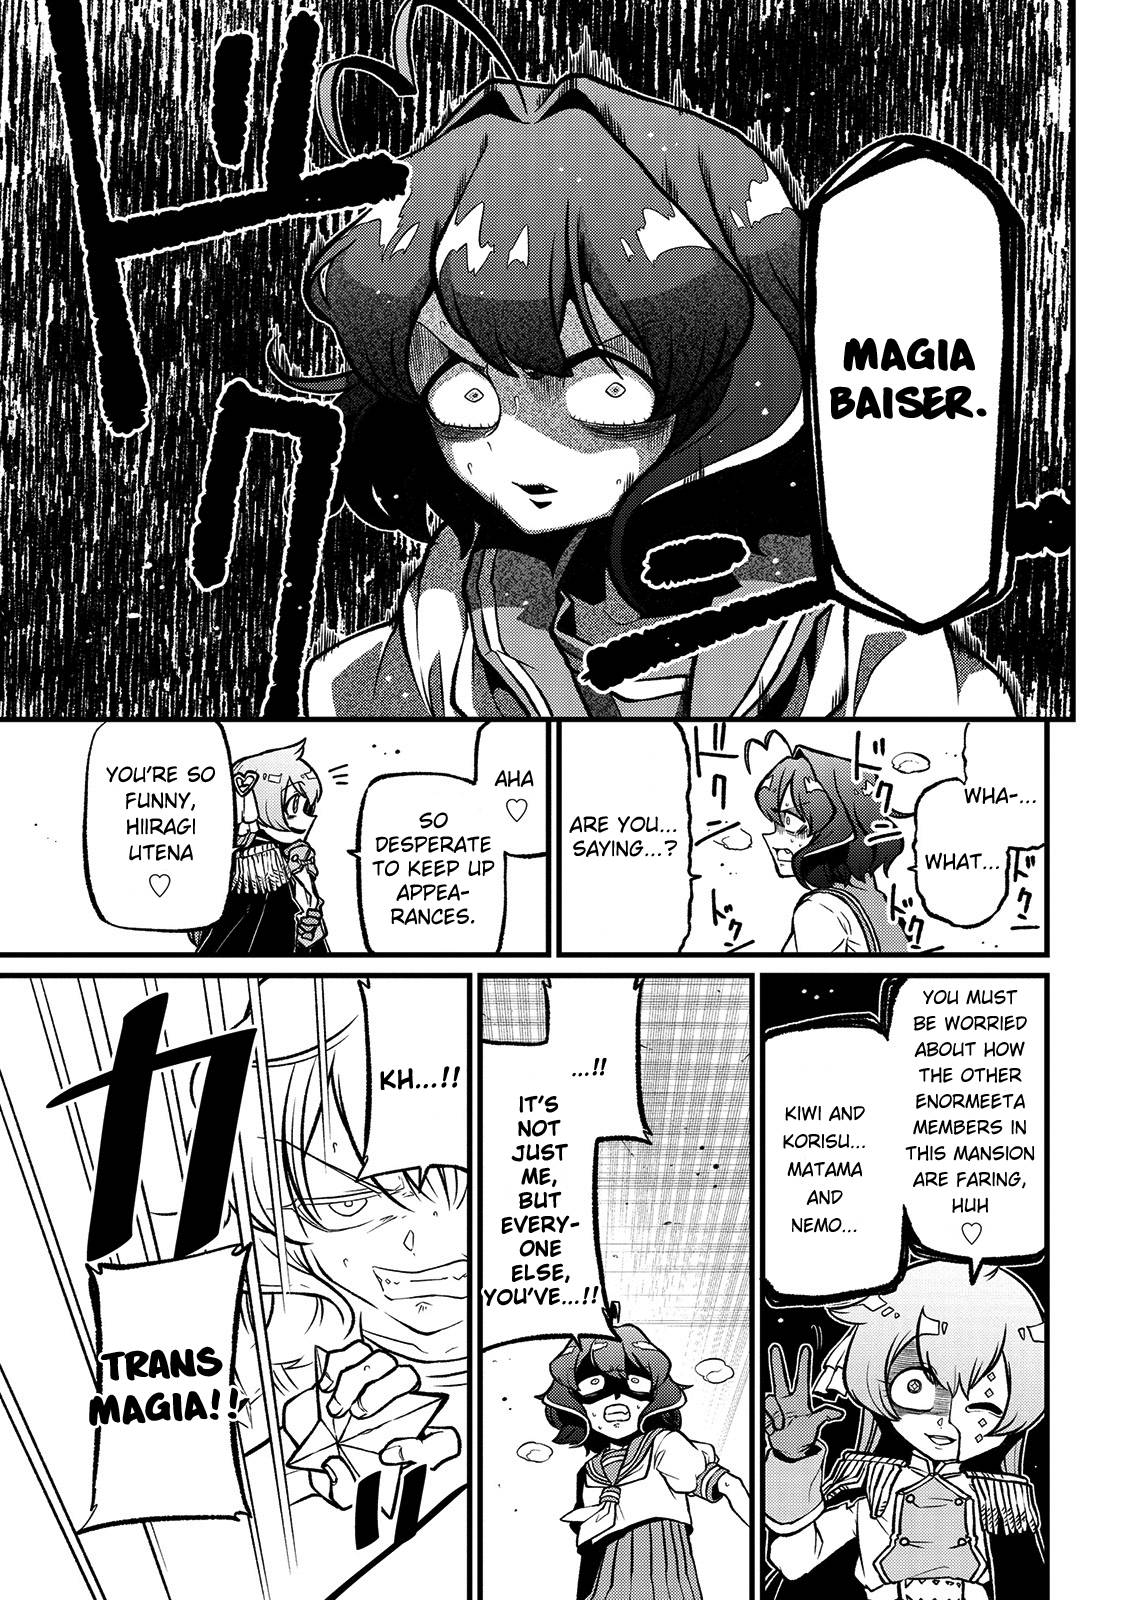 Read Looking up to Magical Girls Manga English [New Chapters] Online Free -  MangaClash